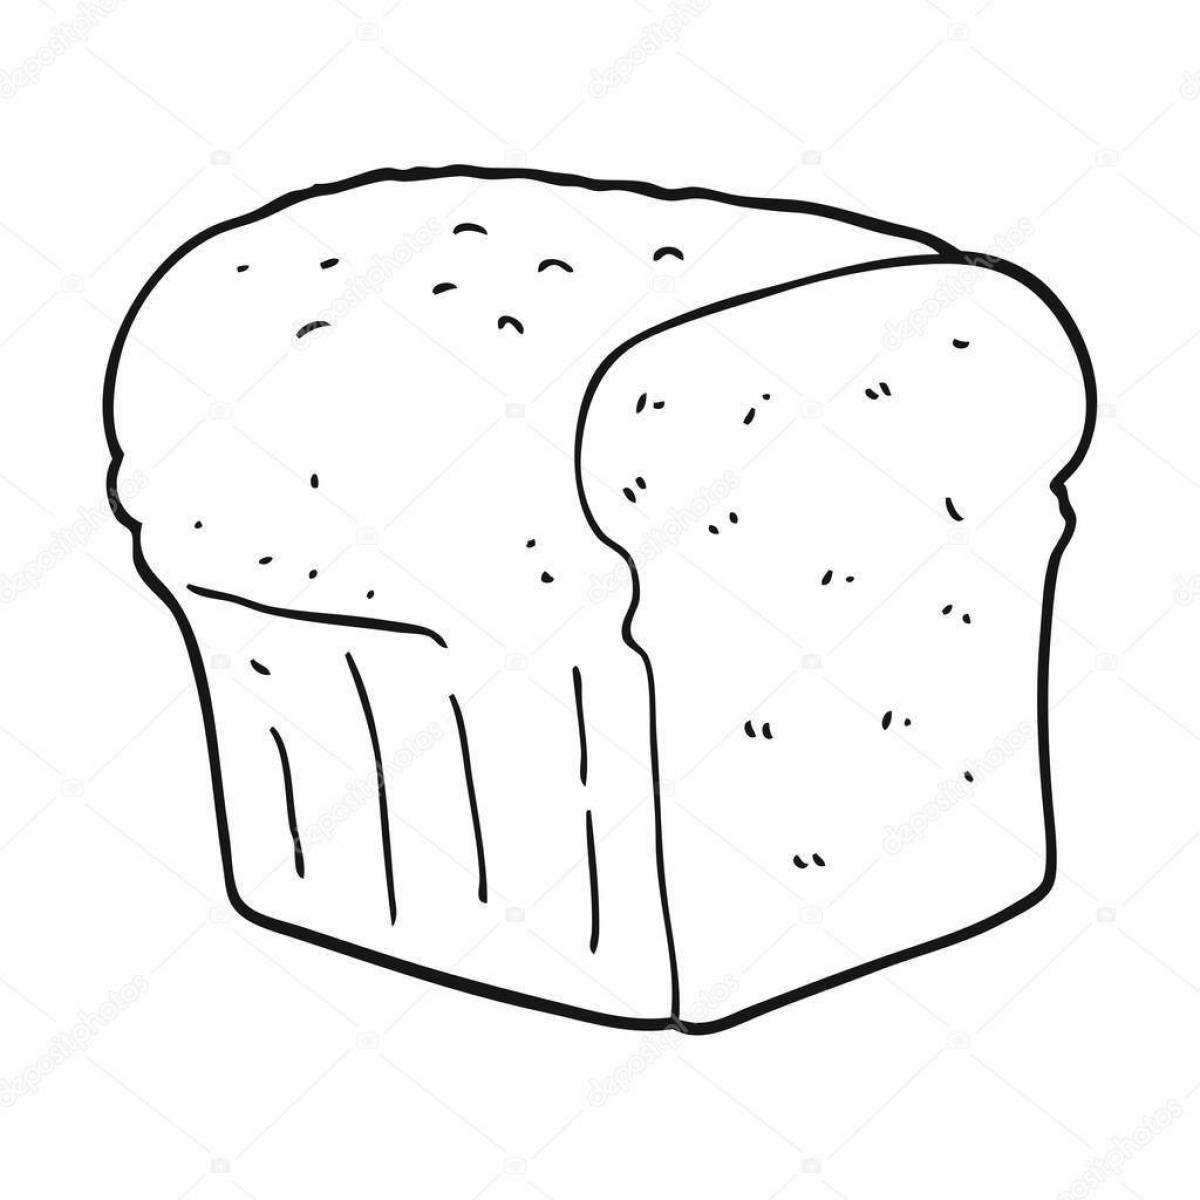 Delicious loaves coloring pages